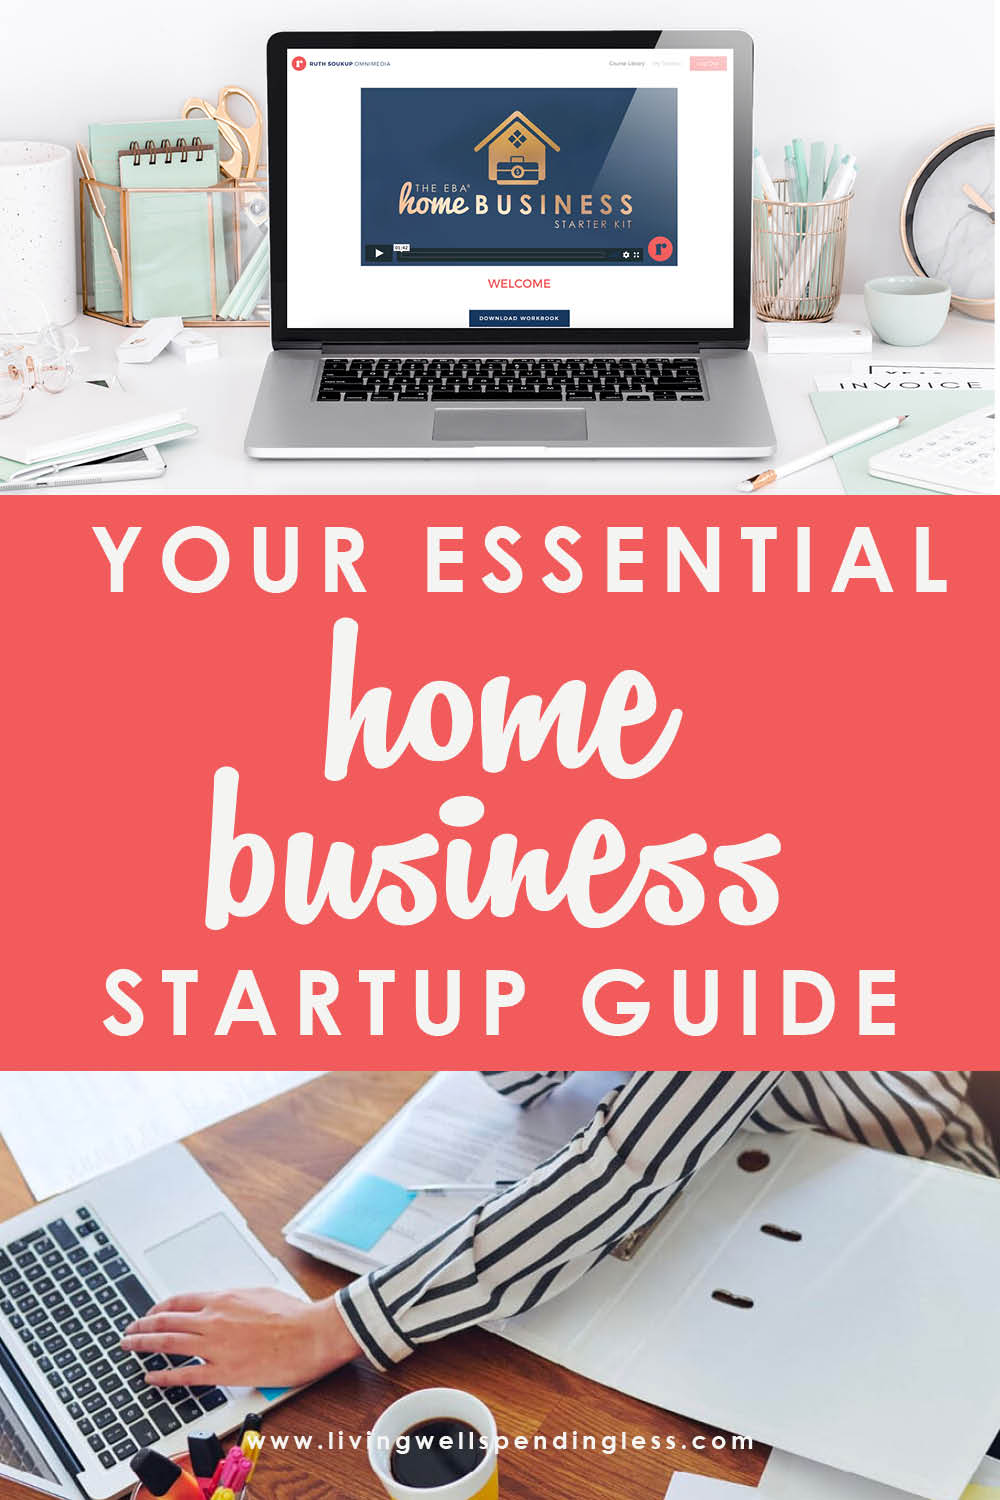 Ready to start your own business but unsure where to begin? This guide walks you through the steps you need to take first to start a new business. #smallbusiness #businessideas #howtostartabusiness #business #entrepreneur #ideatoexcecution #businessstrategy #mompreneur #dadpreneur #startingabusiness #smallbusinessstartup